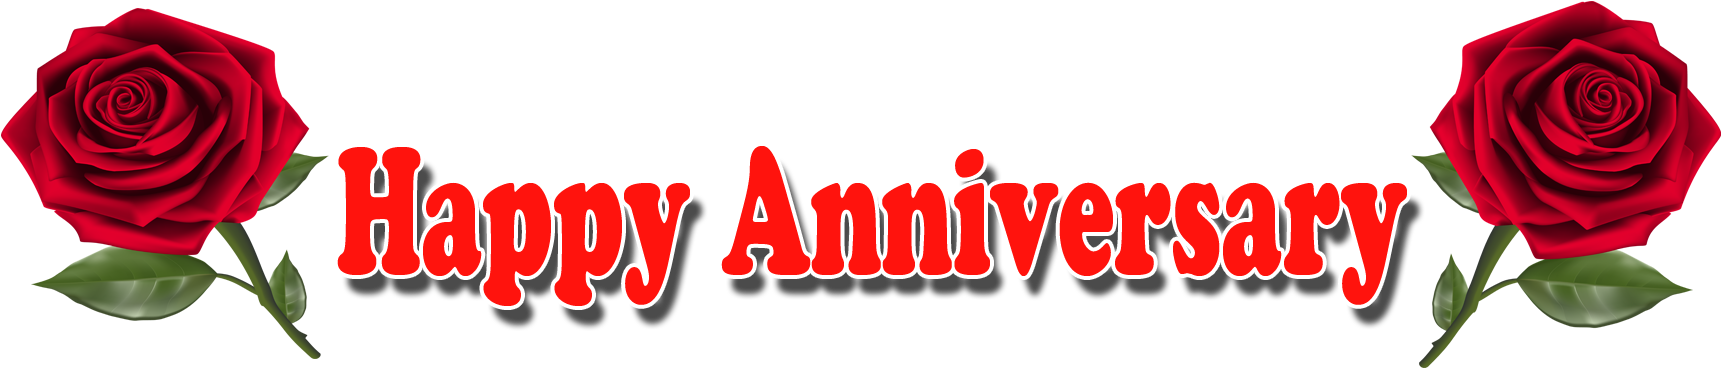 Happy Anniversary Red Roses Banner PNG